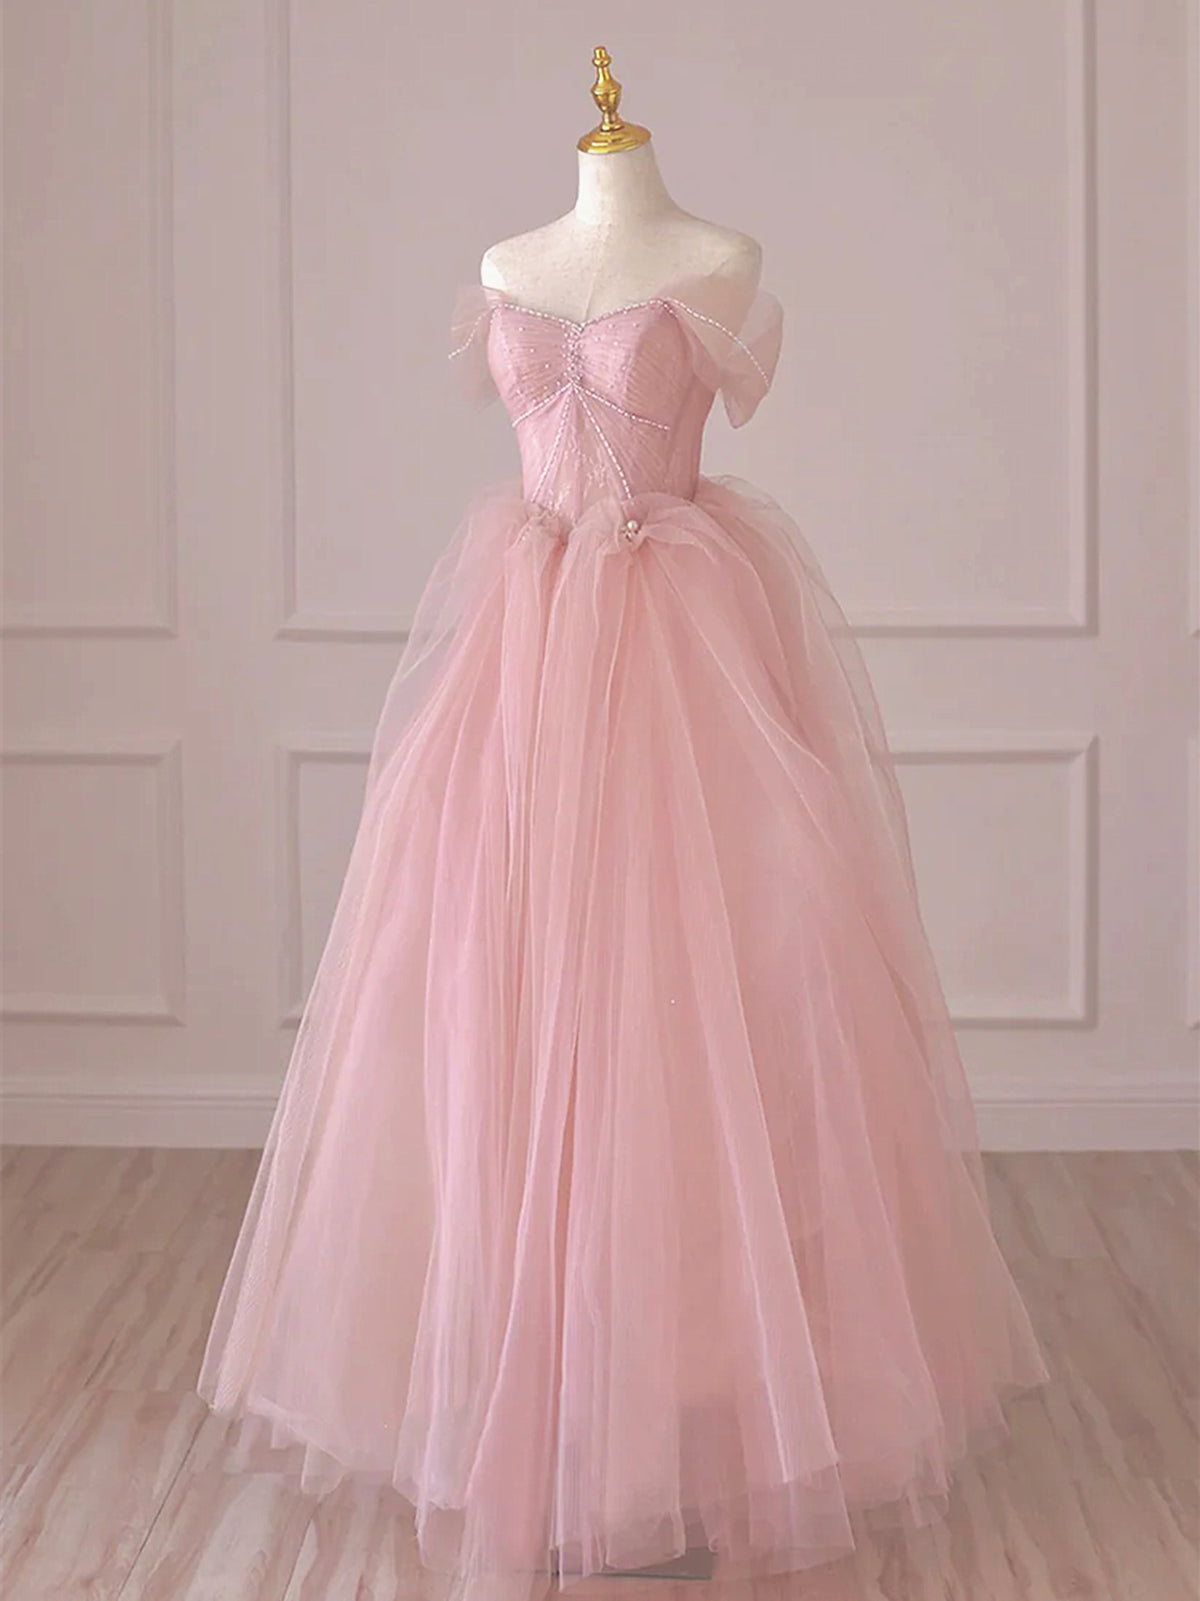 Off the Shoulder Pink Tulle Long Corset Prom Dresses, Pink Tulle Long Corset Formal Evening Dresses outfit, Fashion Dress